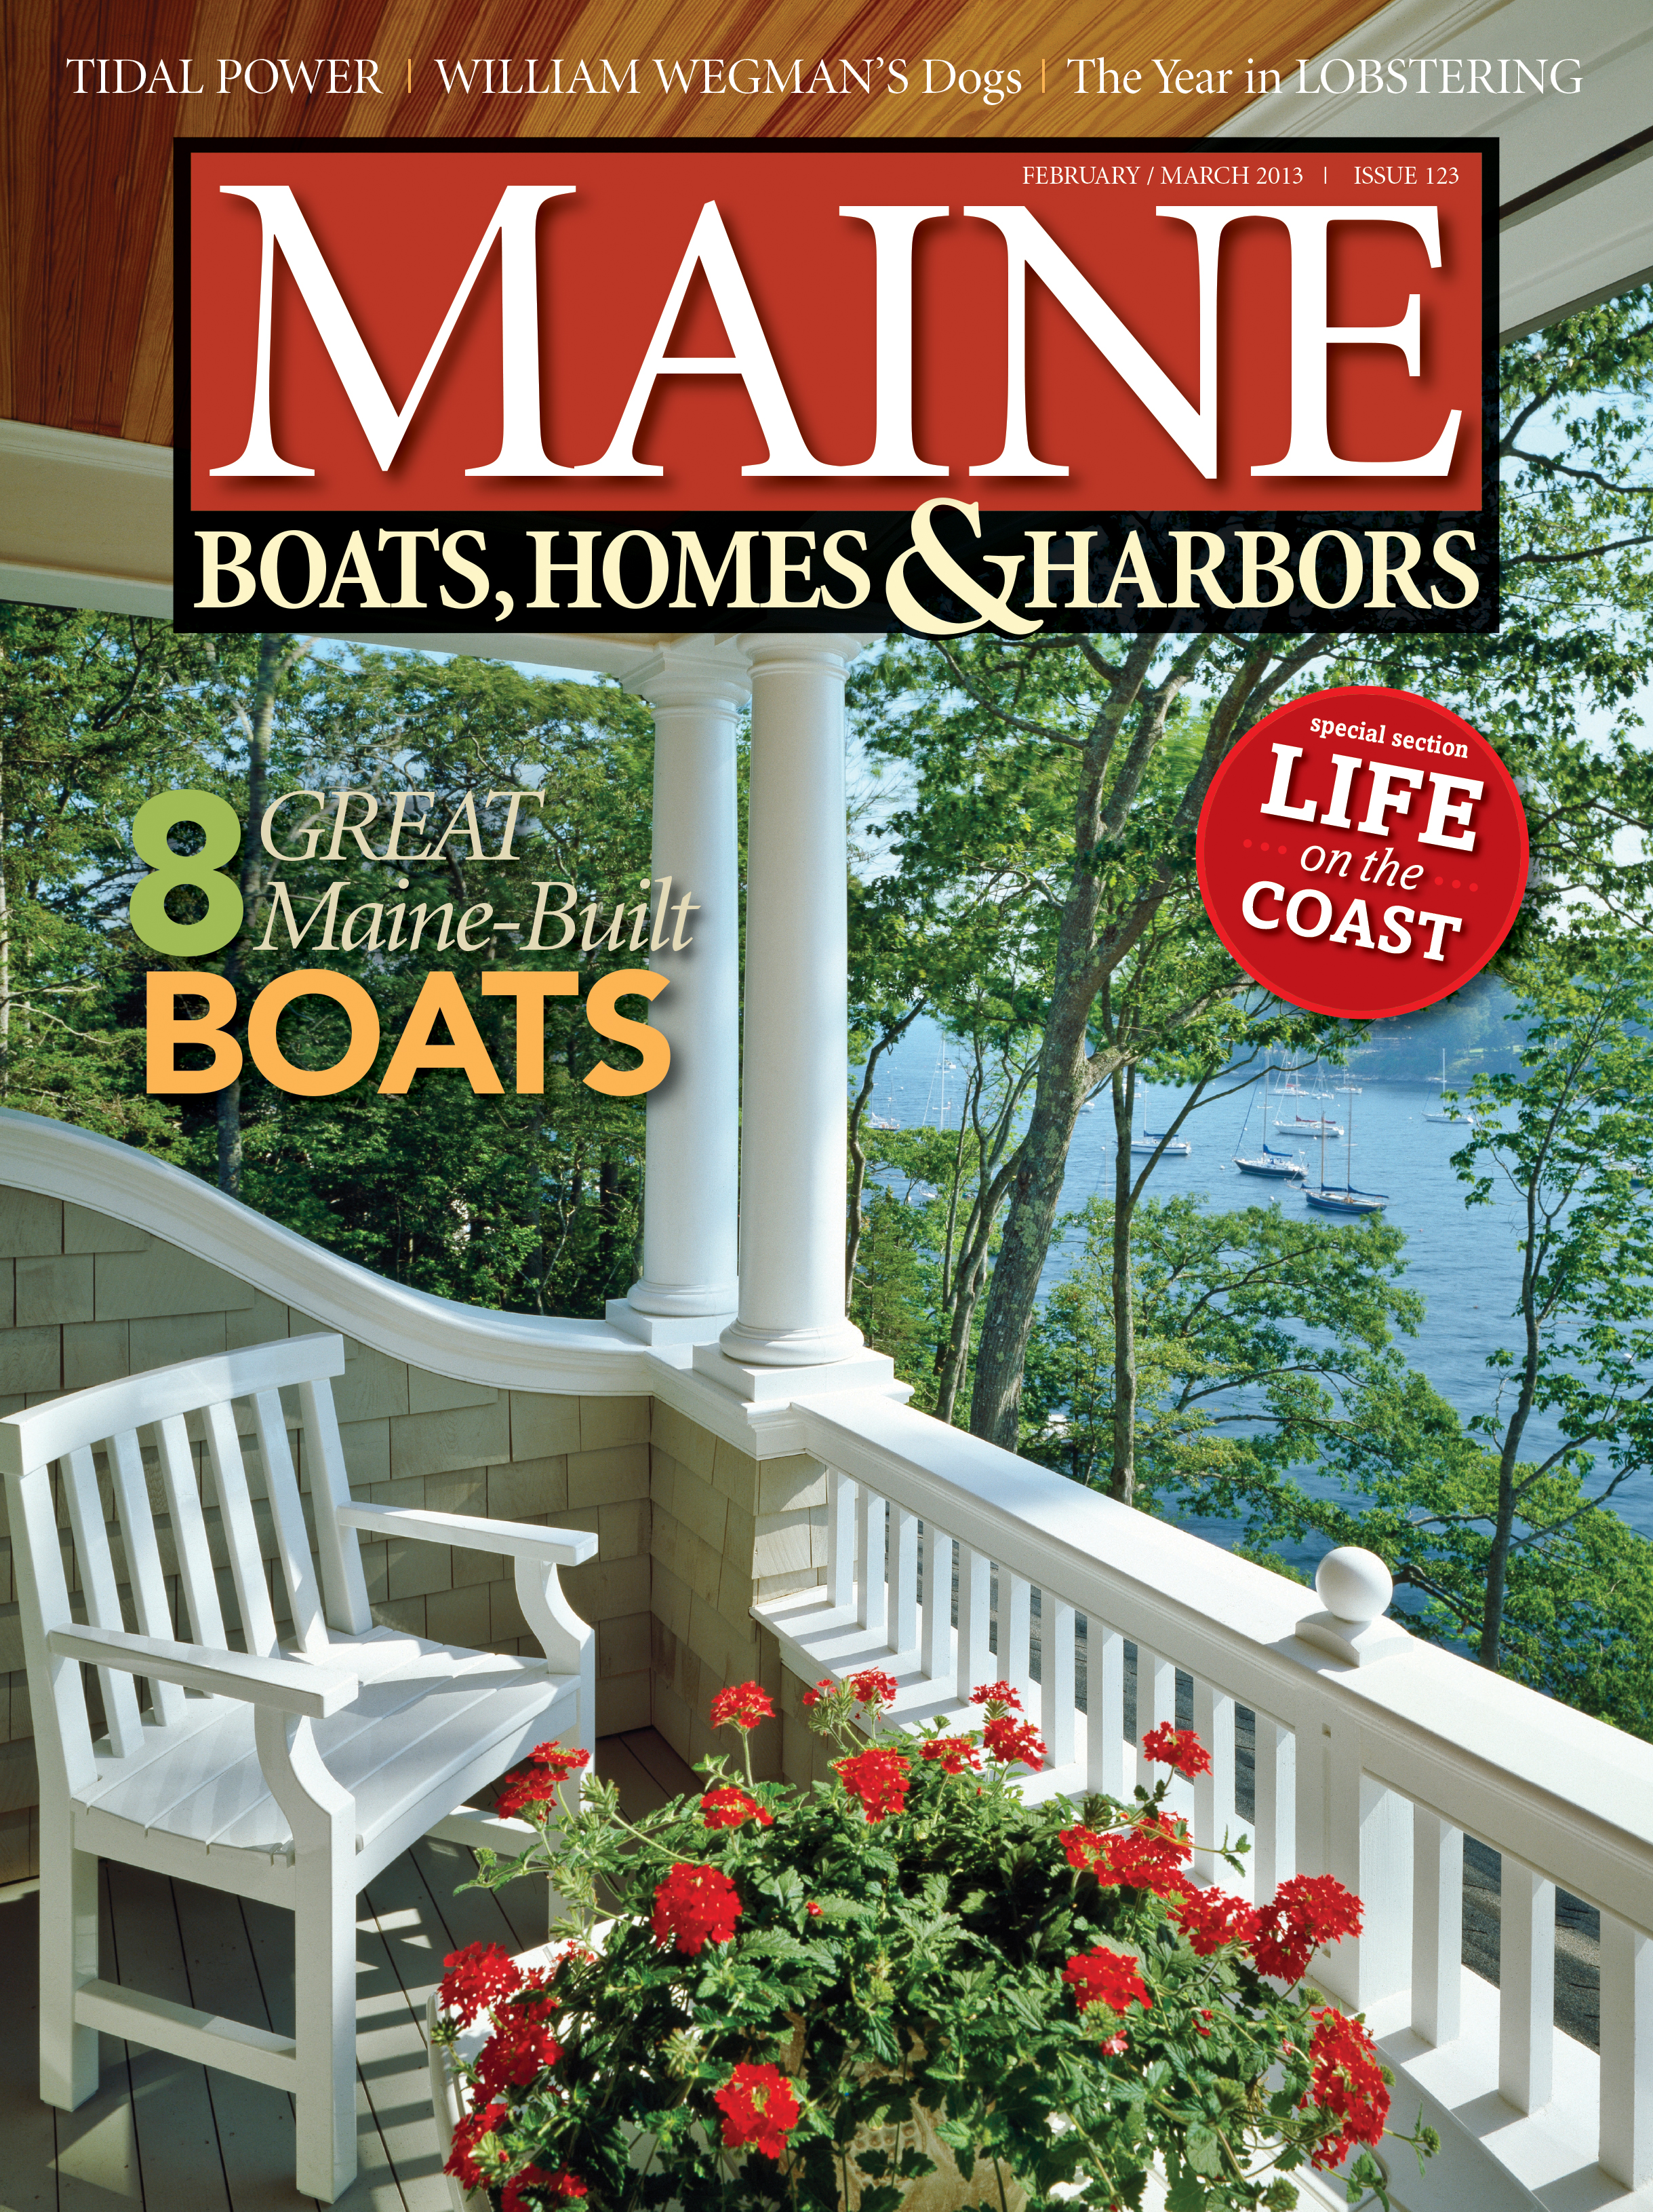 Maine Boats, Homes & Harbors, Issue 123